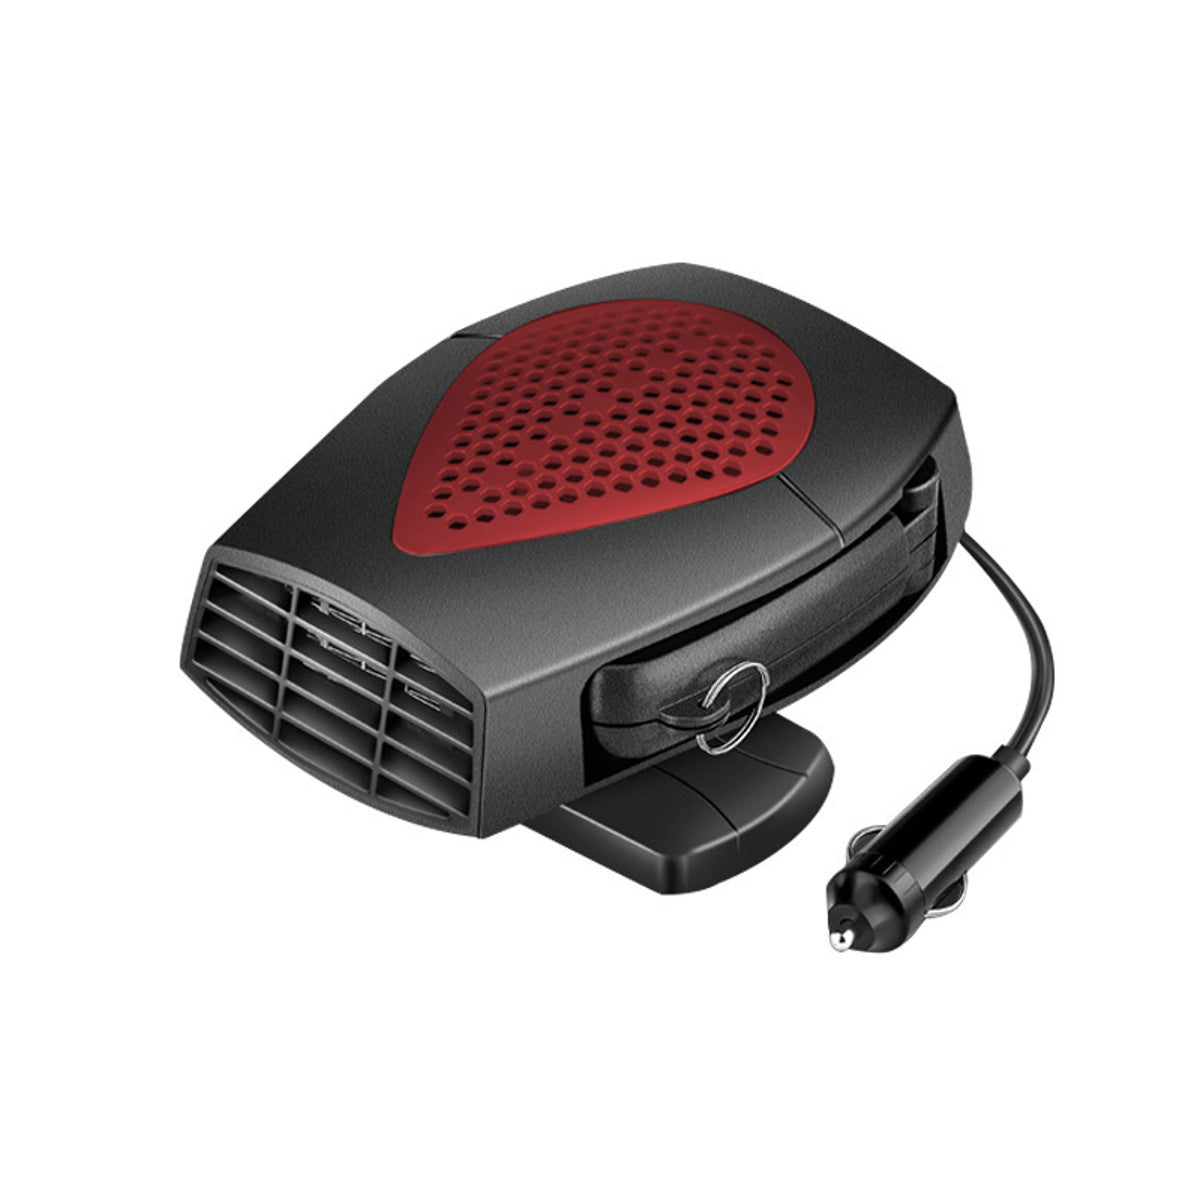 12V/24V Car Defroster Heater 3 In 1 Air Purifier Auto Demister Cooler Dryer Dehumidifiers - Auto GoShop